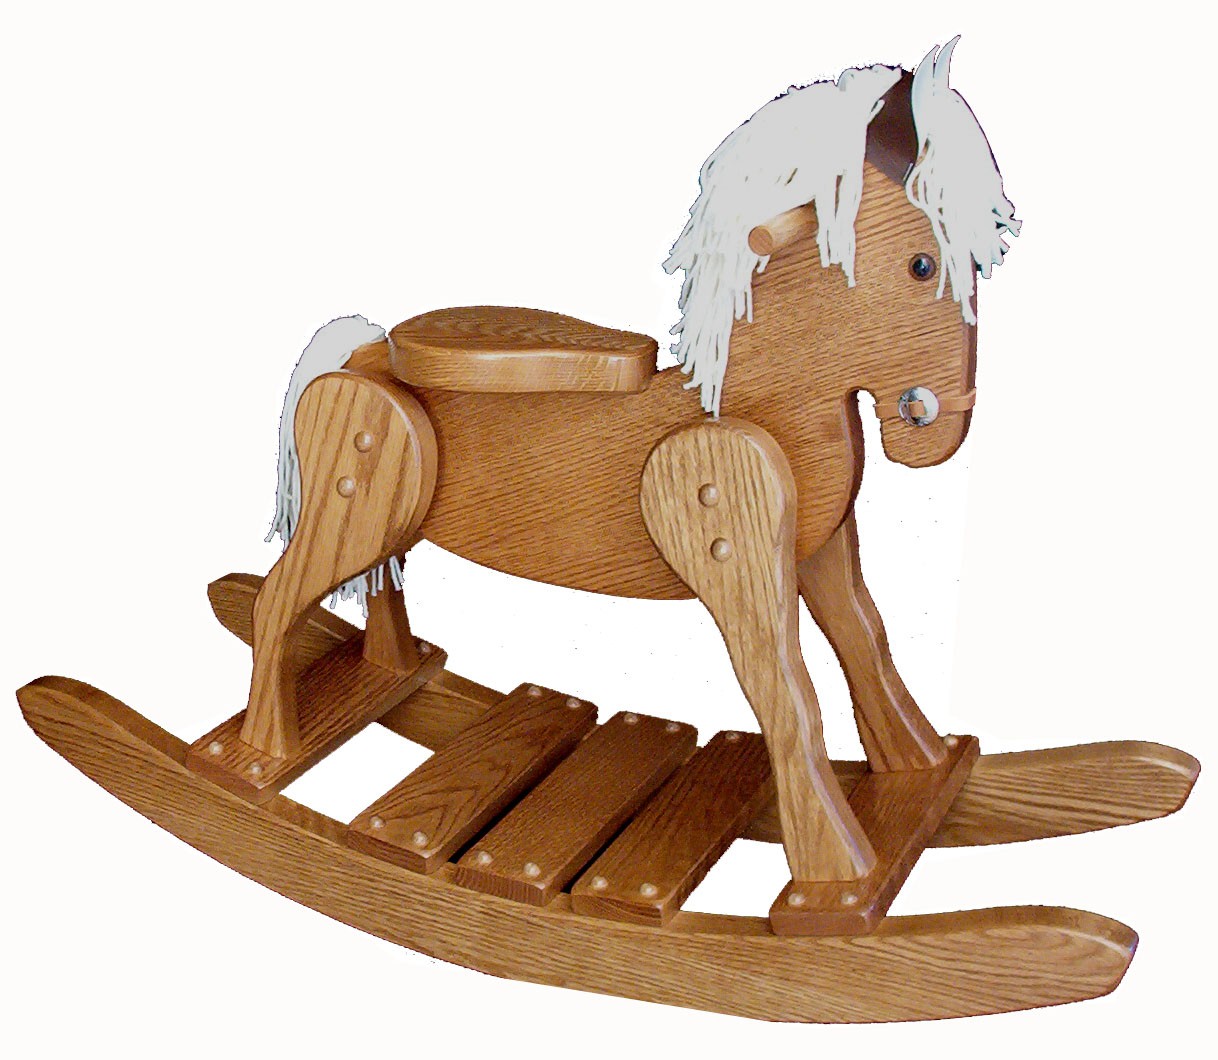 Details about kids rocking horse toy wooden wood amish toddler